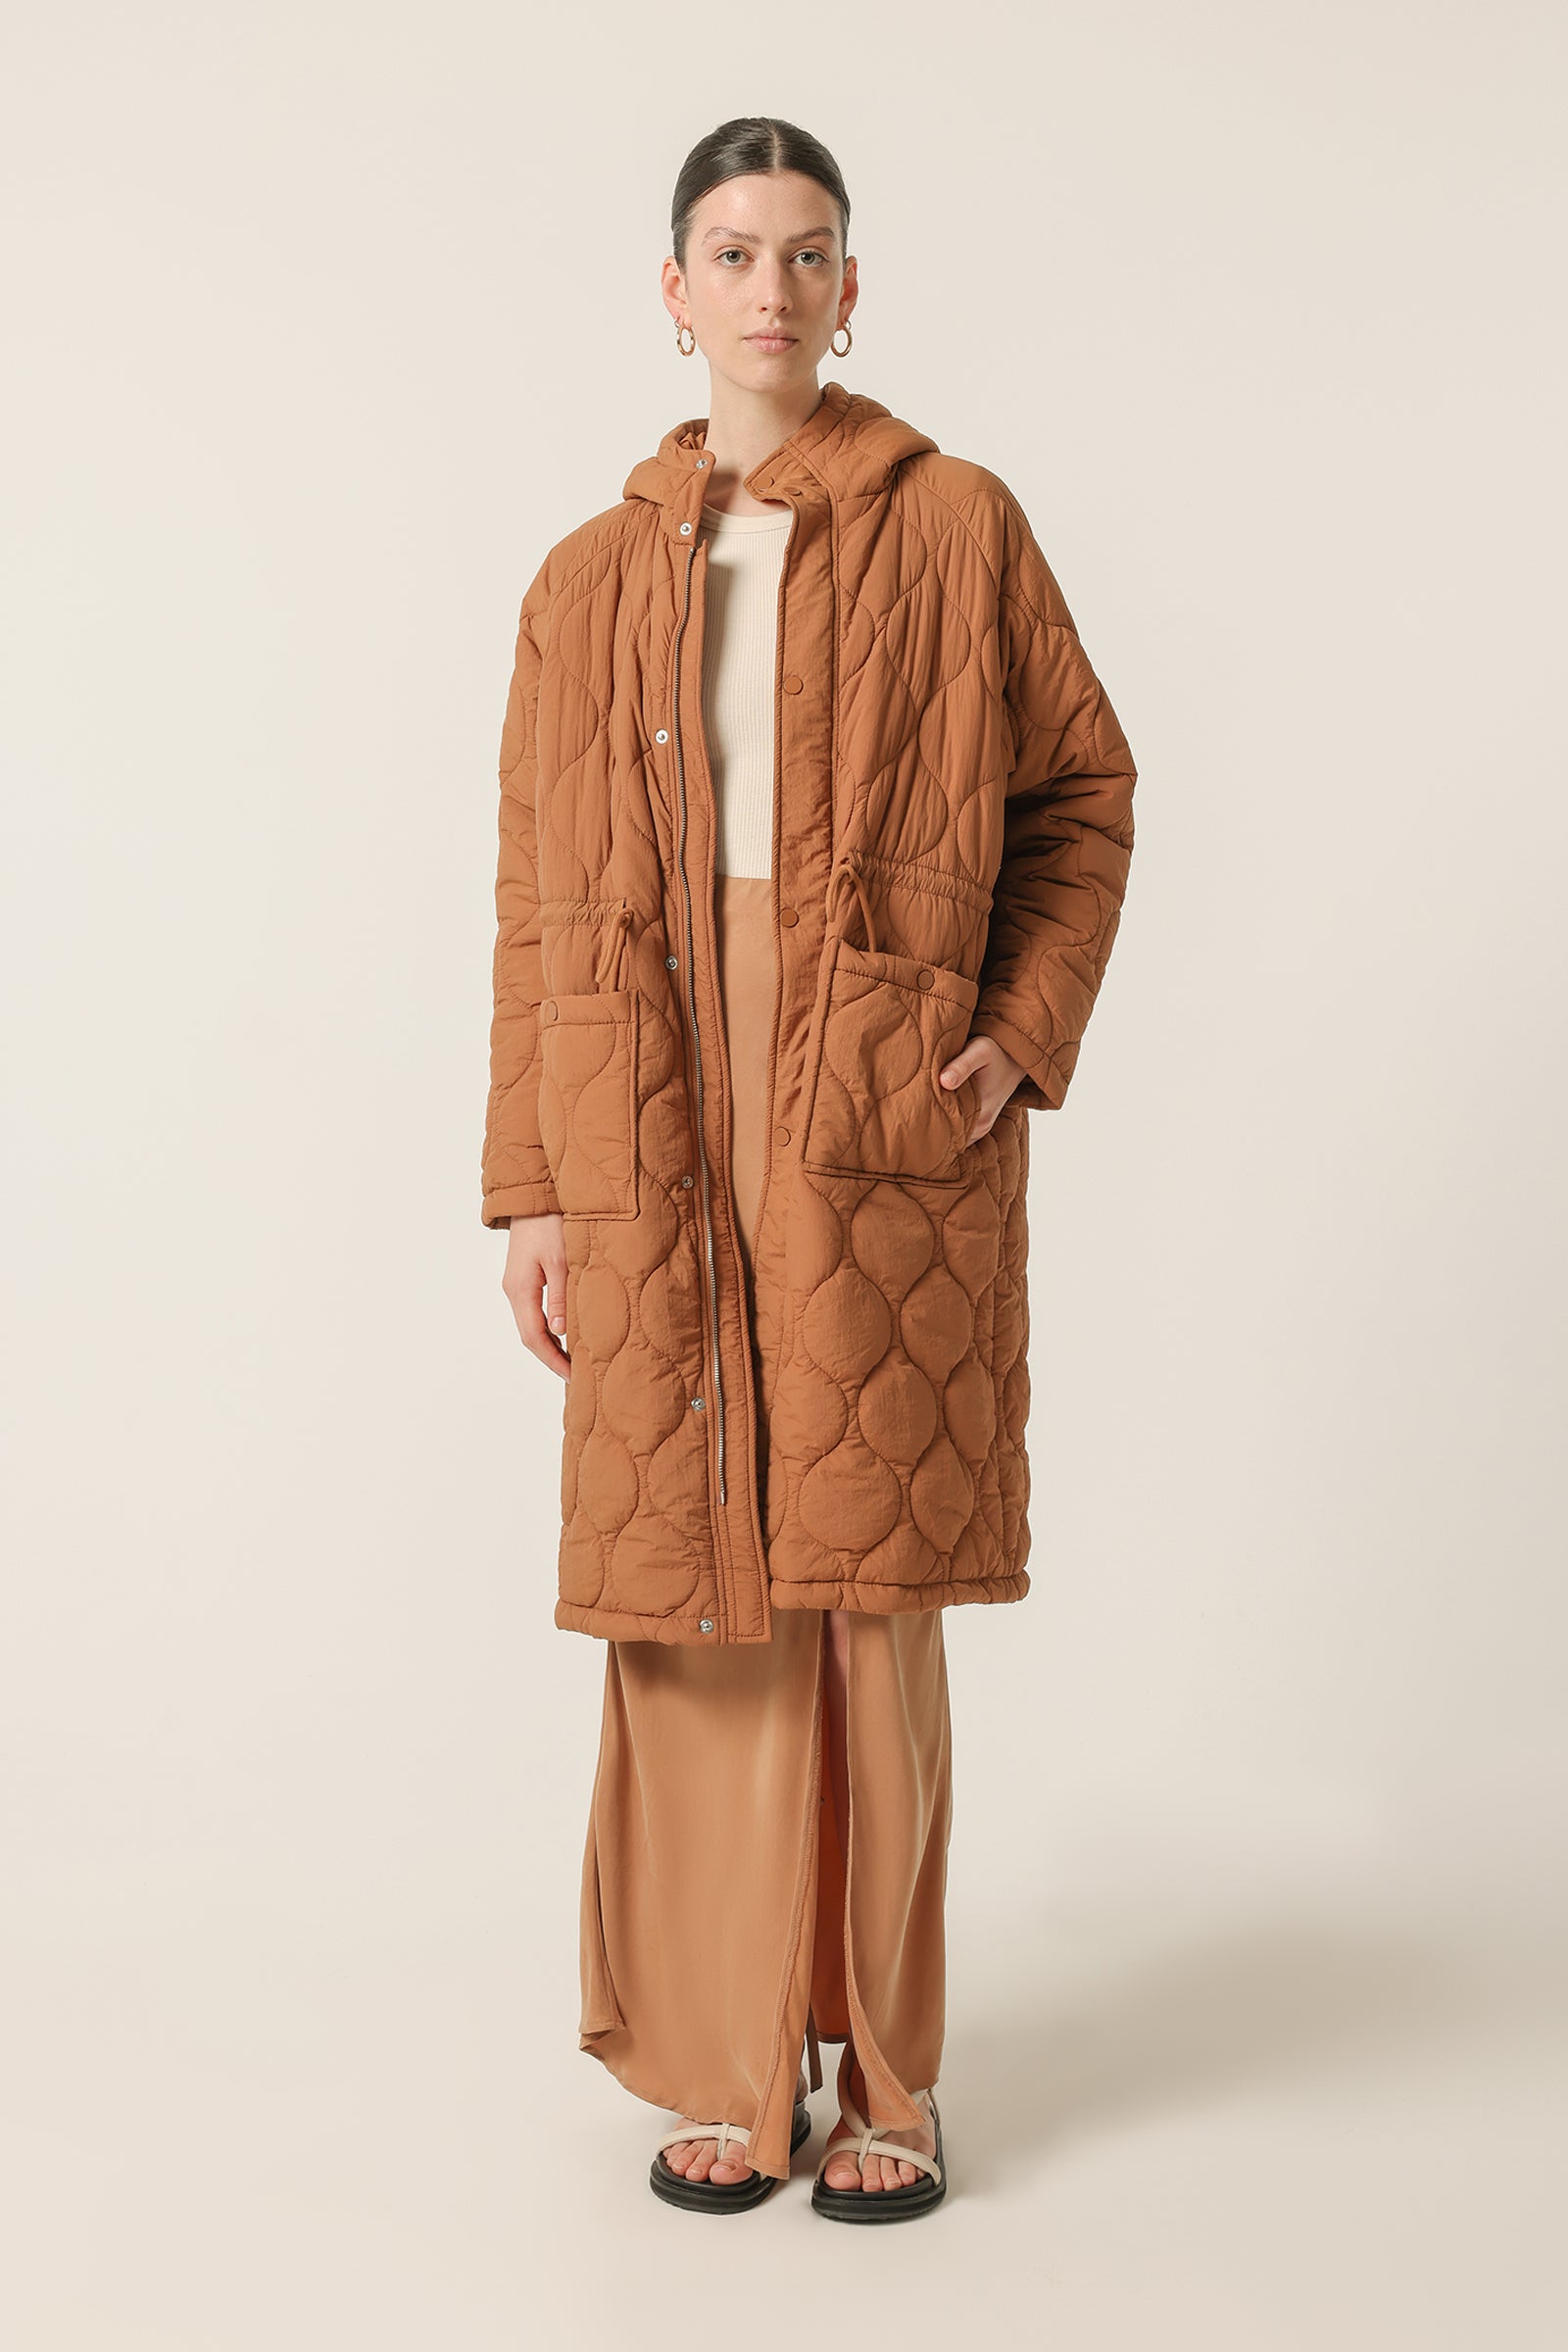 Nude Lucy Jerome Parka in Maple